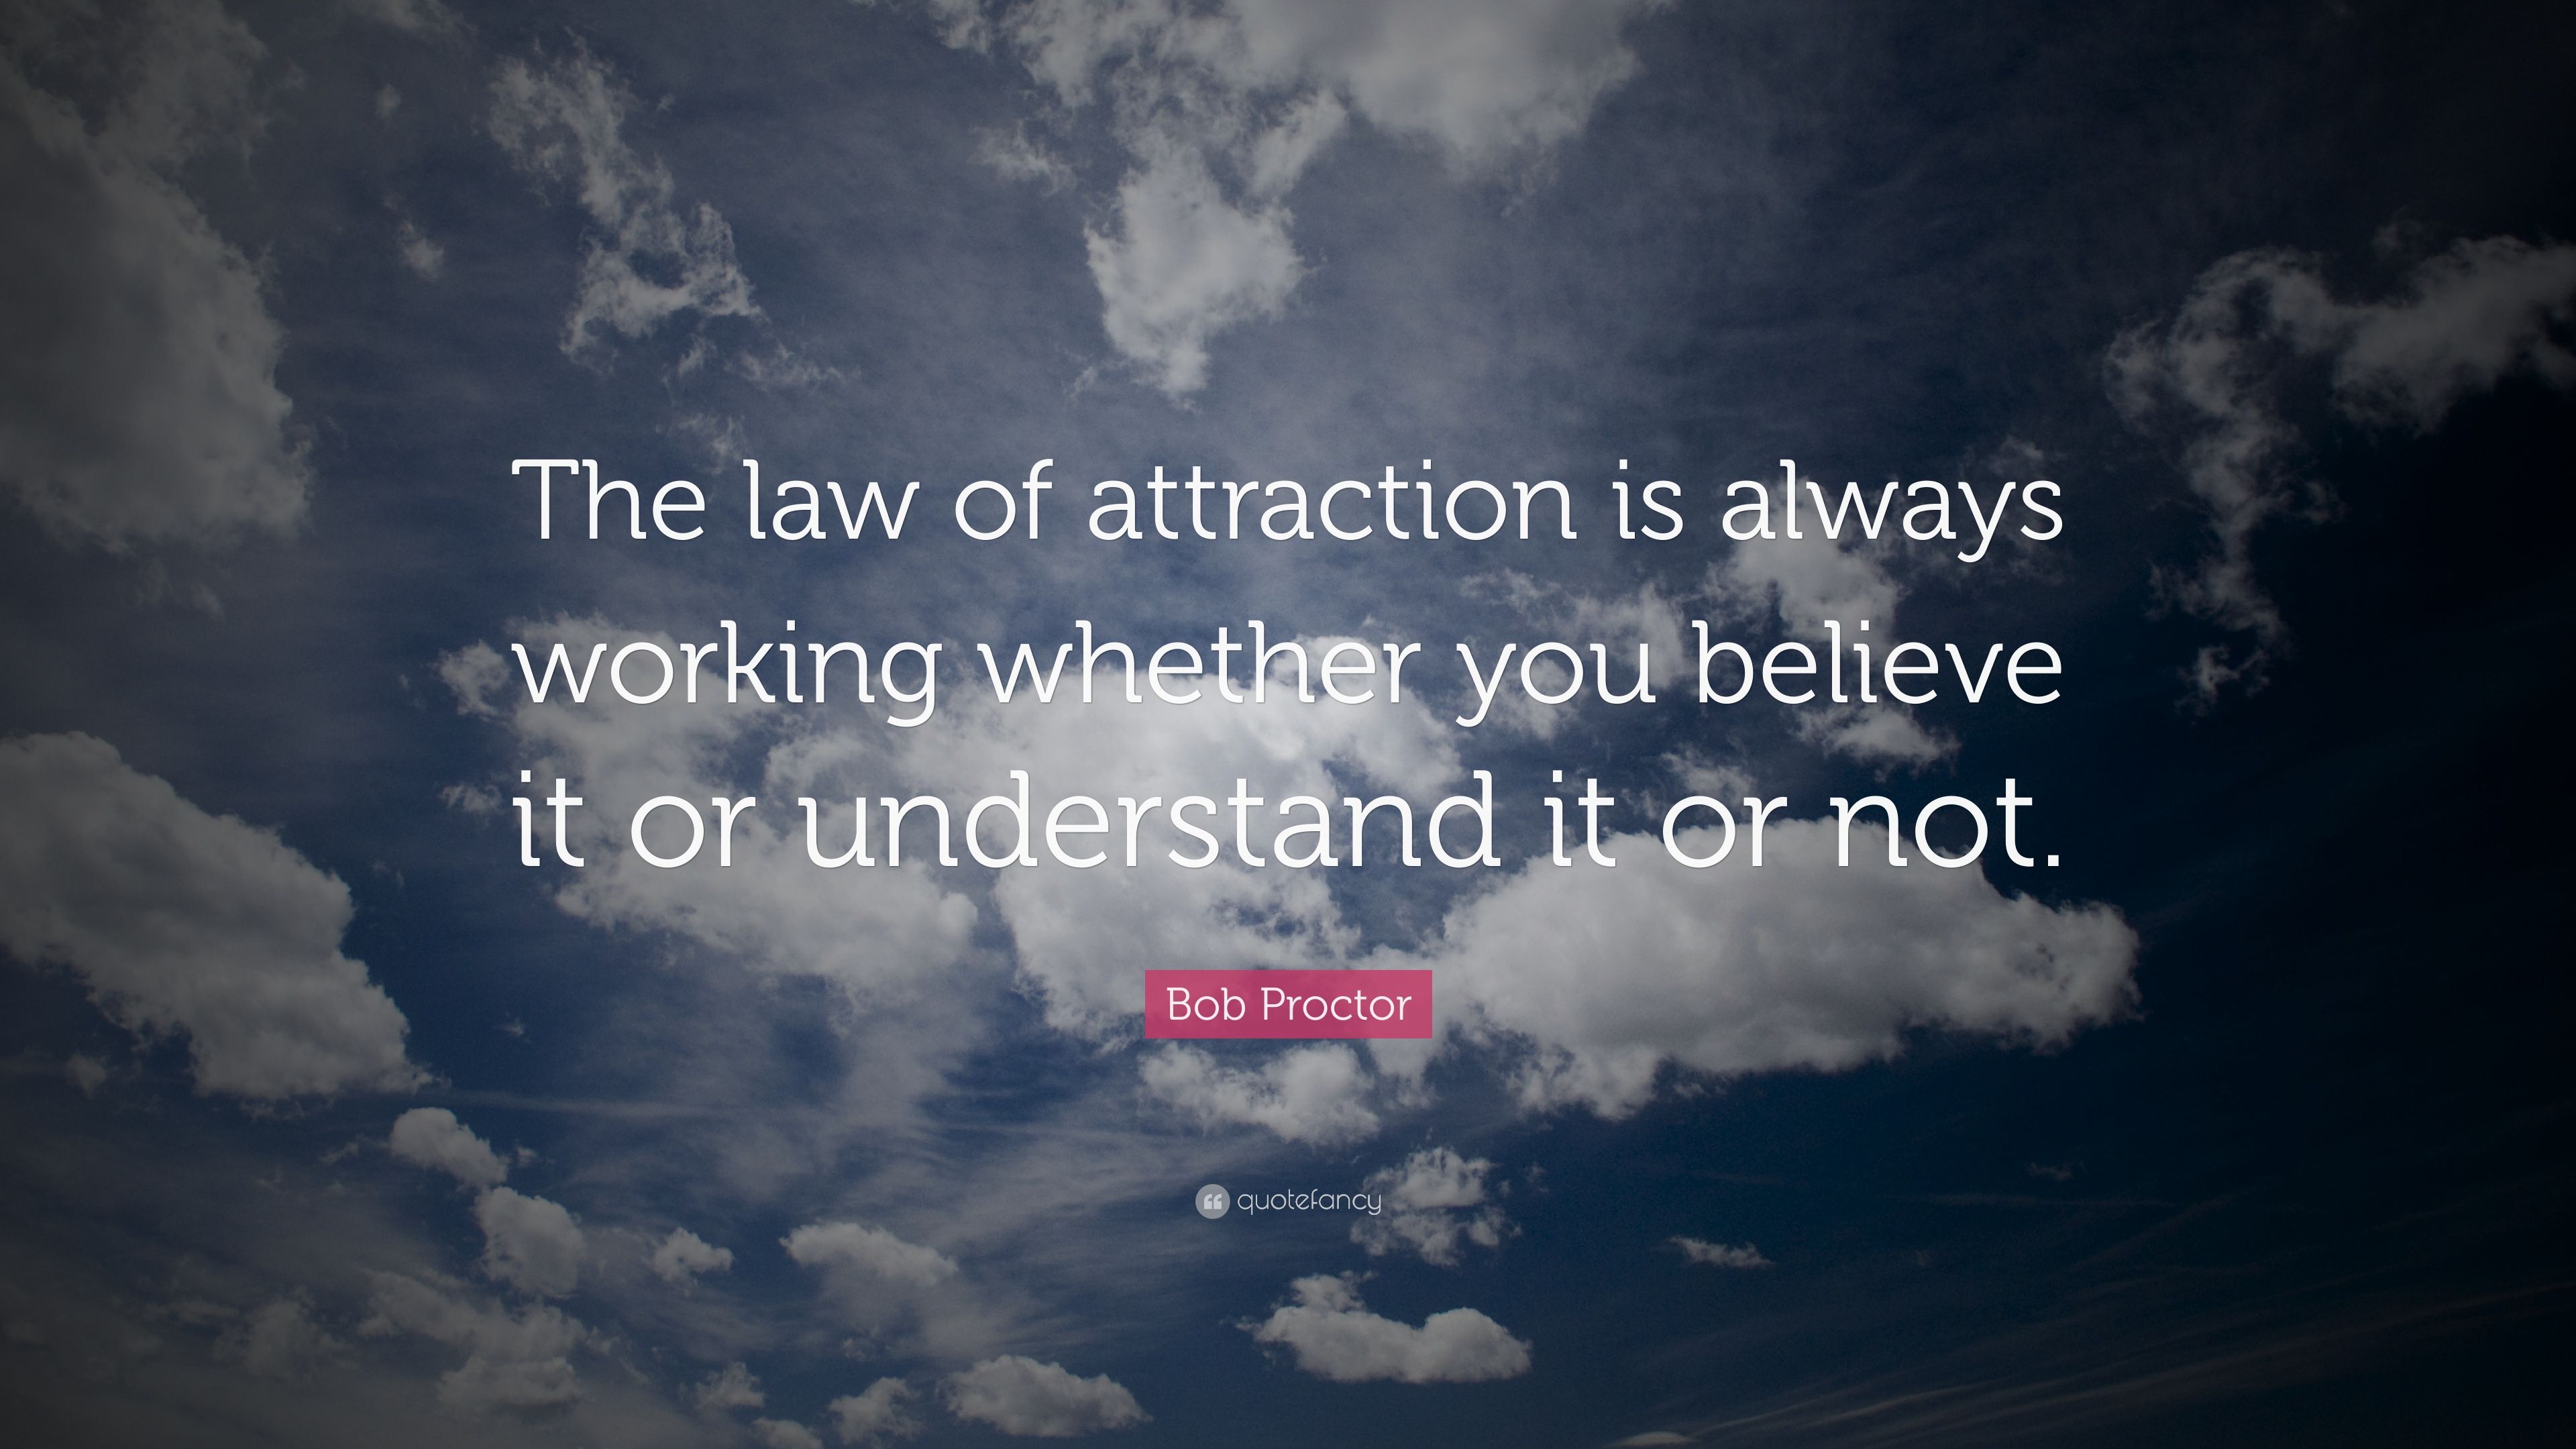 Bob Proctor Quote: “The law of attraction is always working